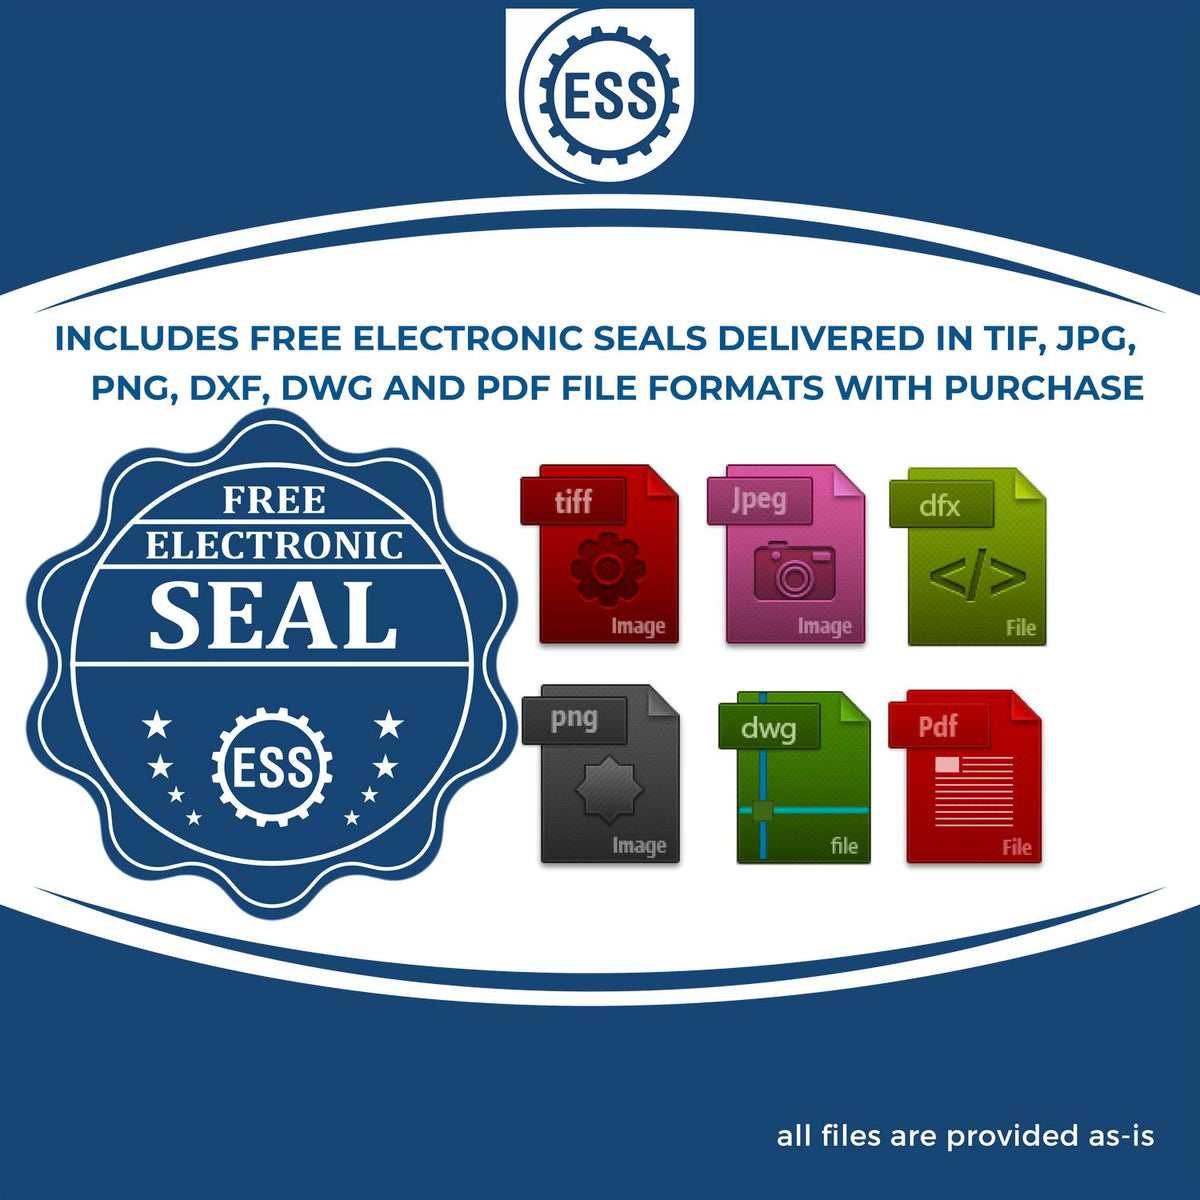 An infographic for the free electronic seal for the State of Louisiana Extended Long Reach Engineer Seal illustrating the different file type icons such as DXF, DWG, TIF, JPG and PNG.